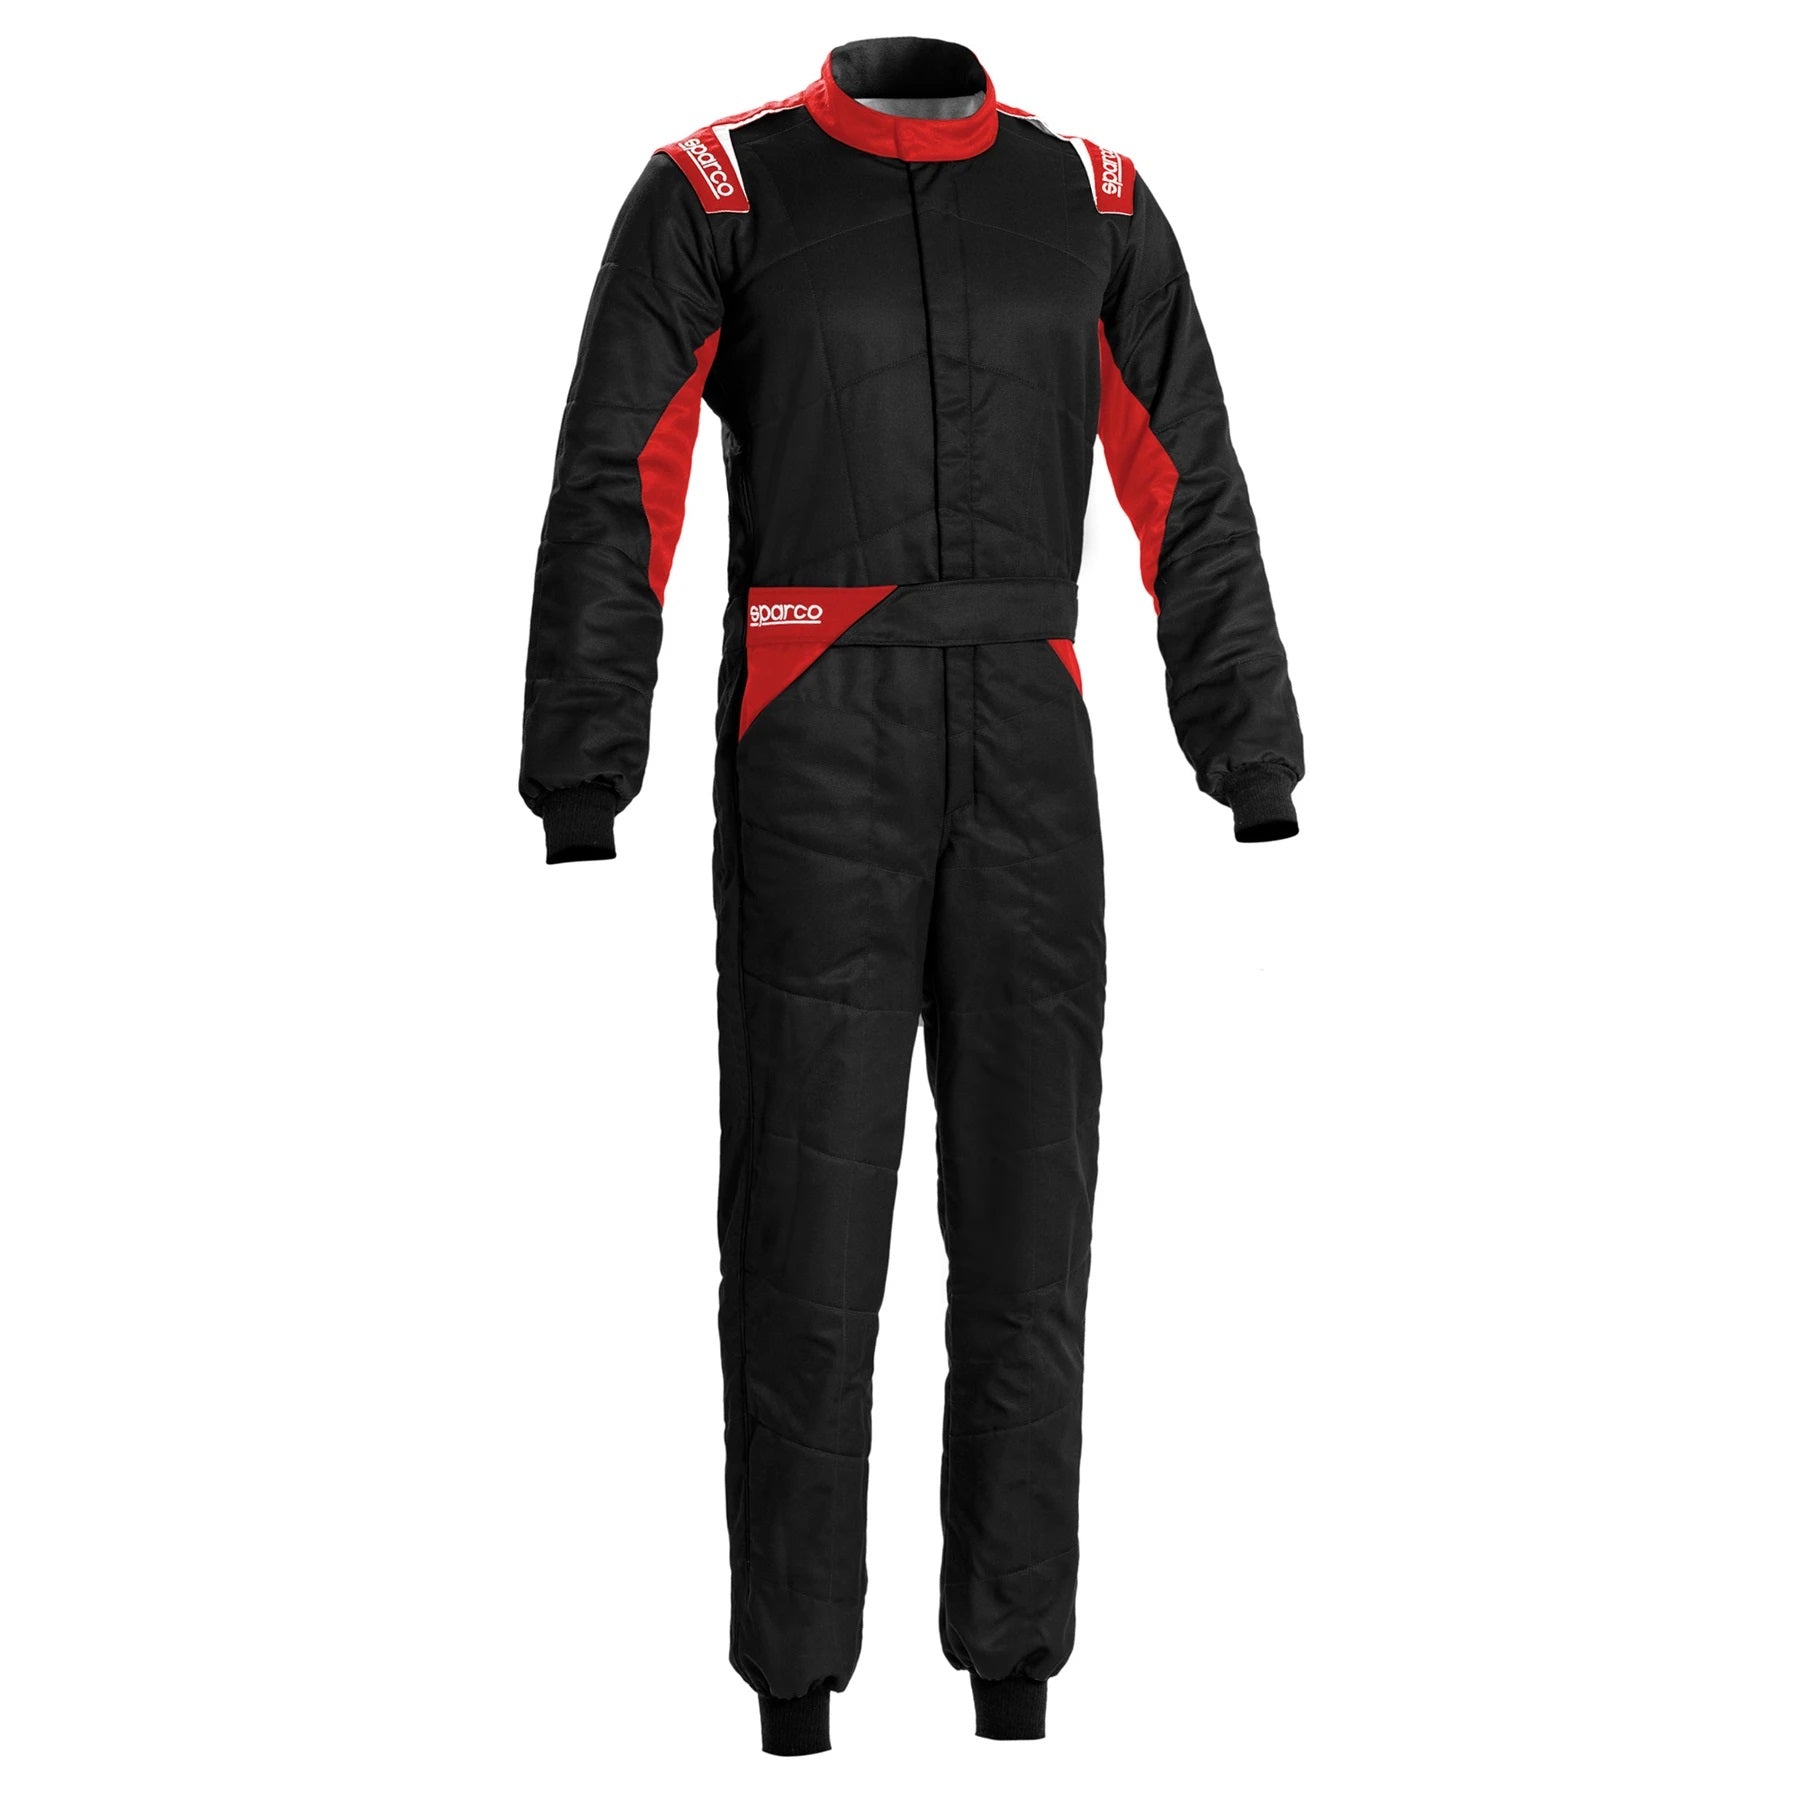 Sparco Driver Suit – Winding Road Racing